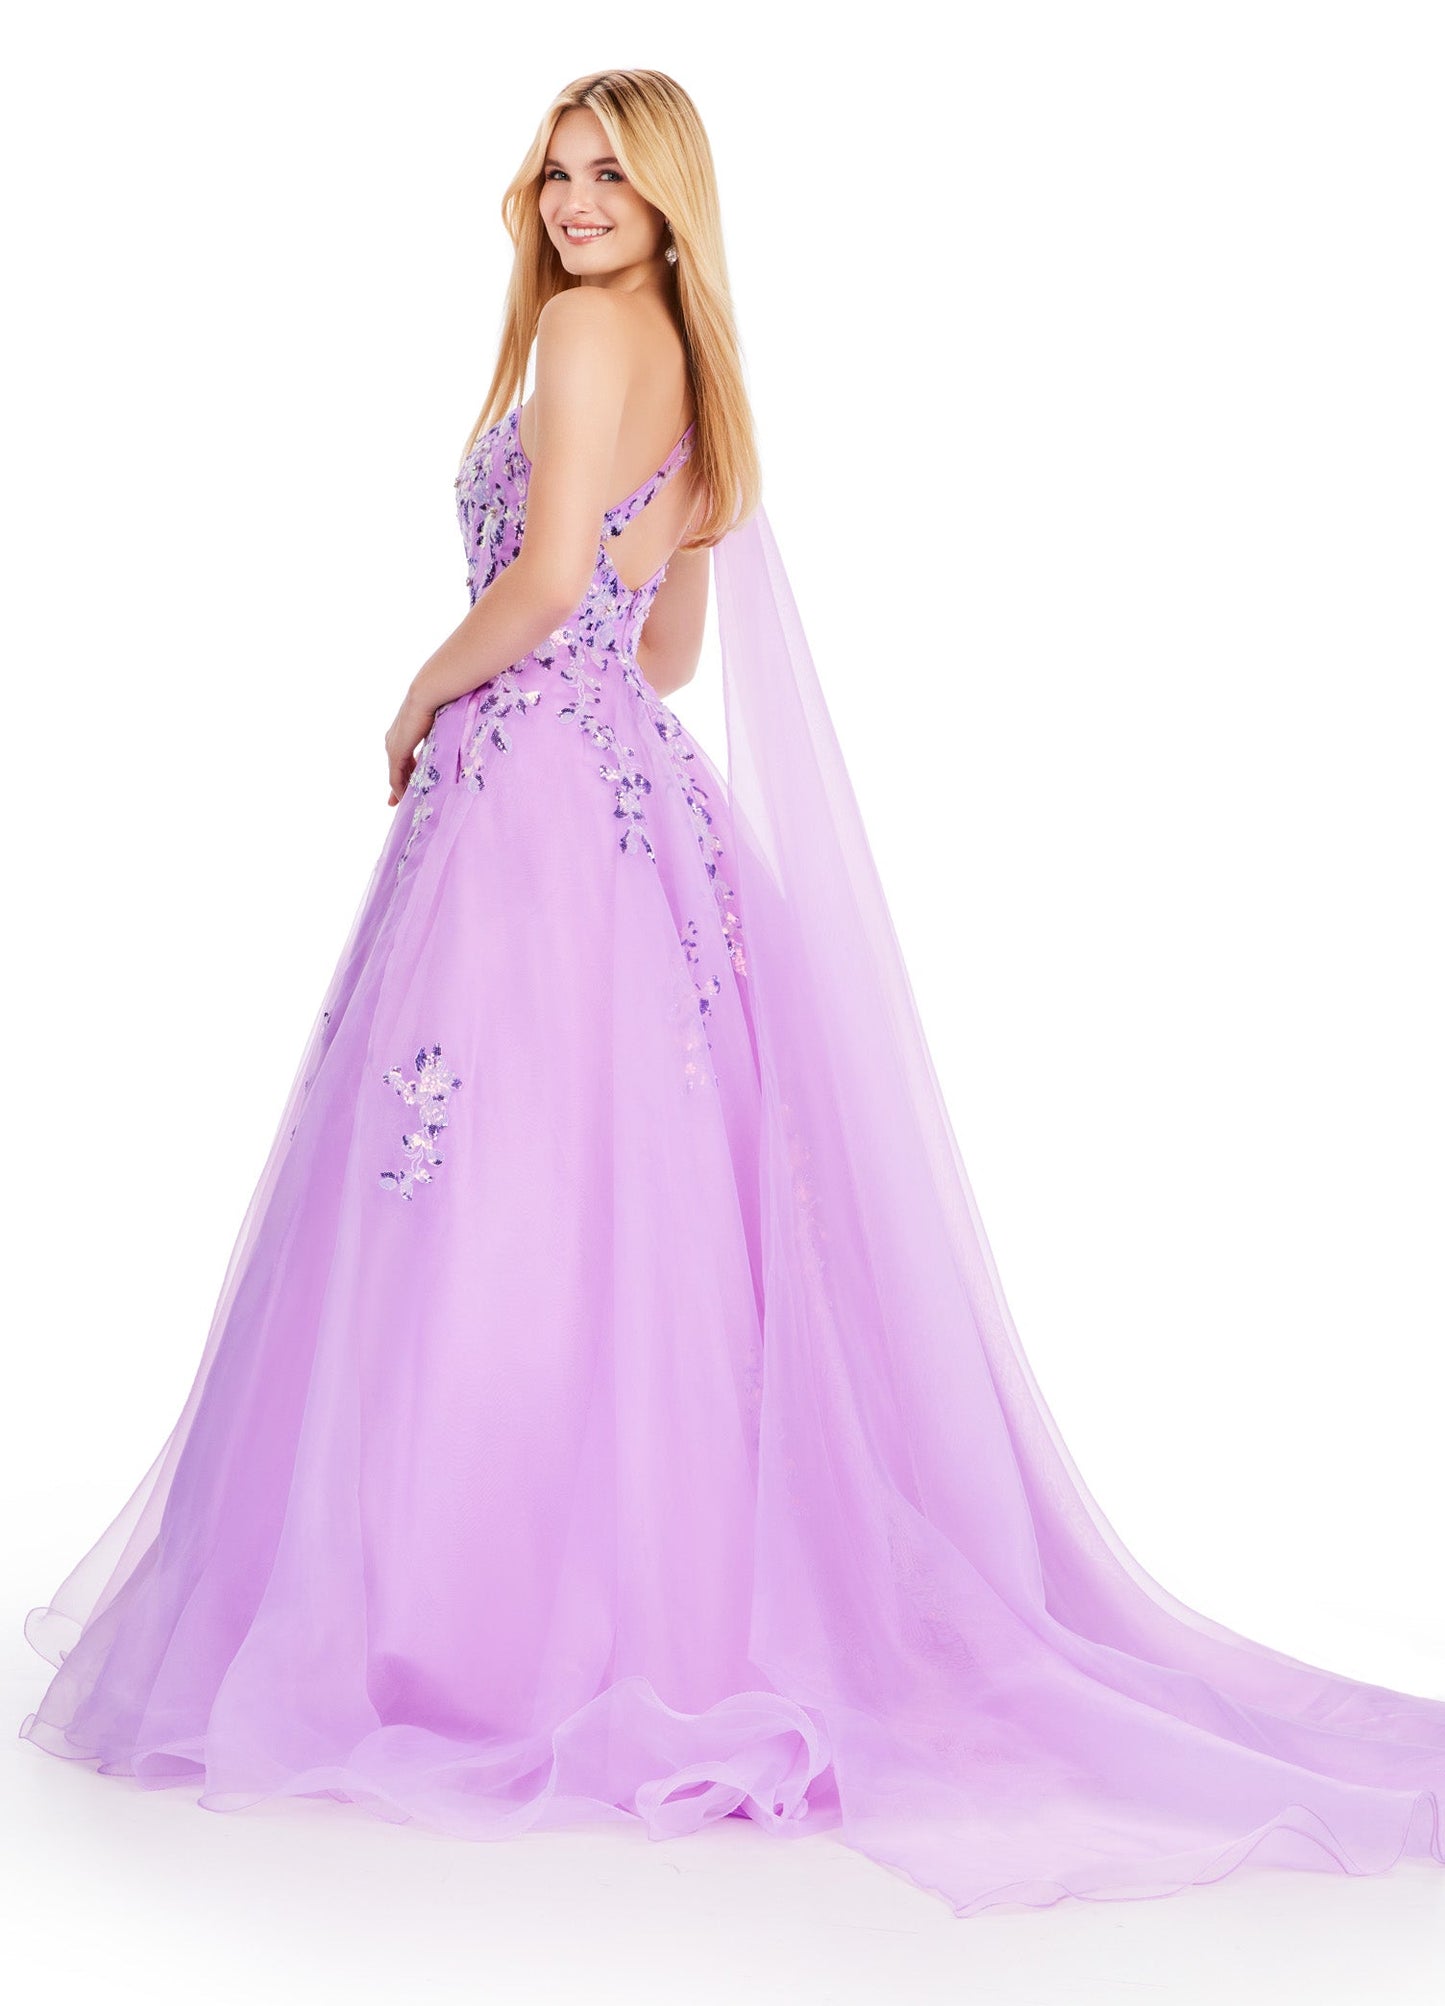 This Ashley Lauren 11573 Long Prom Dress exudes elegance with its one shoulder design and sequin applique. Crafted from high-quality organza, this gown will make you stand out at any formal event or pageant. Its classic silhouette and sparkling details are perfect for making a statement. This romantic one shoulder organza ball gown features intricate sequin applique. The look is complete with an open back and a one shoulder cape.